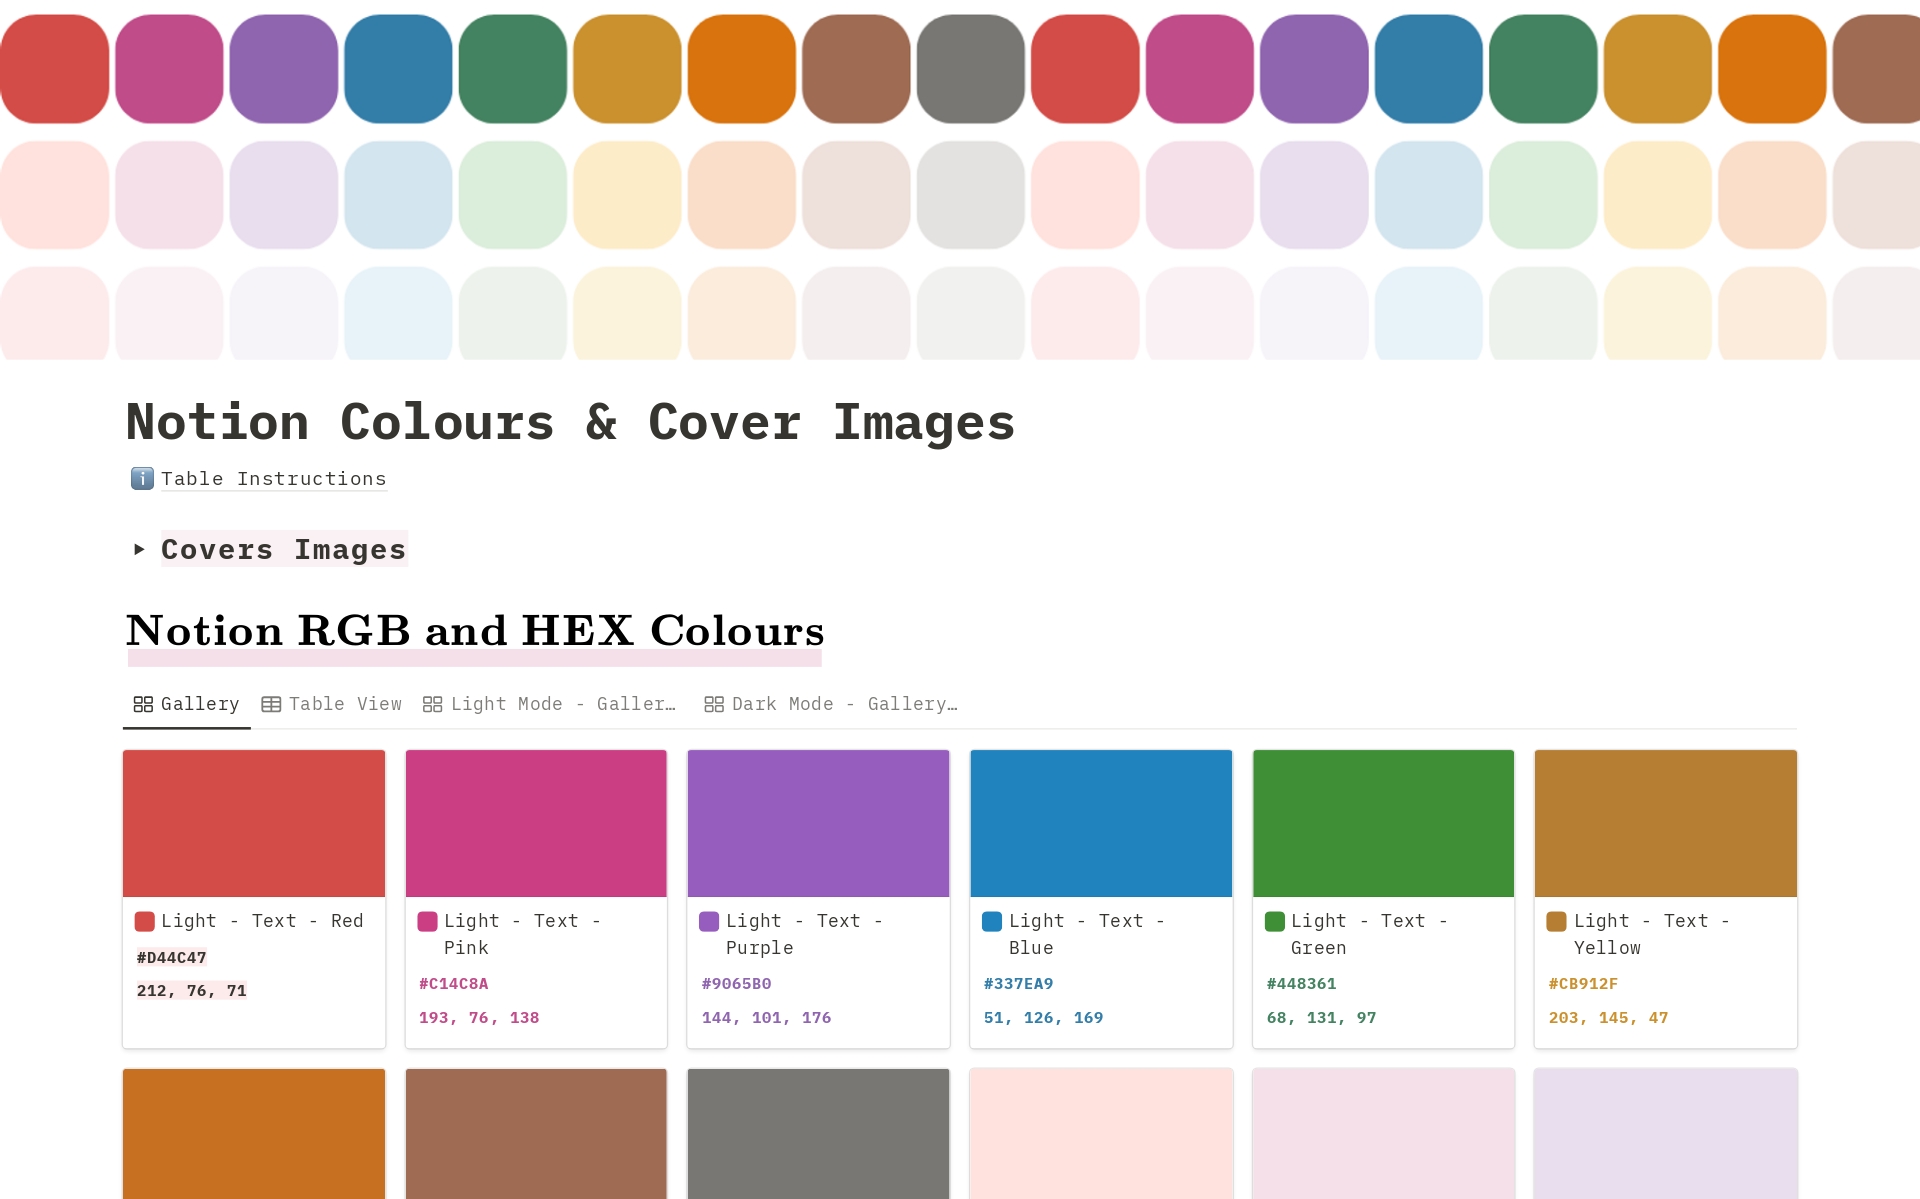 A free Notion template featuring a comprehensive database of all Notion colours with their RGB and hex codes. Greatfor creating custom cover images! Plus, enjoy a selection of free cover images in Notion colours ready to download and use.